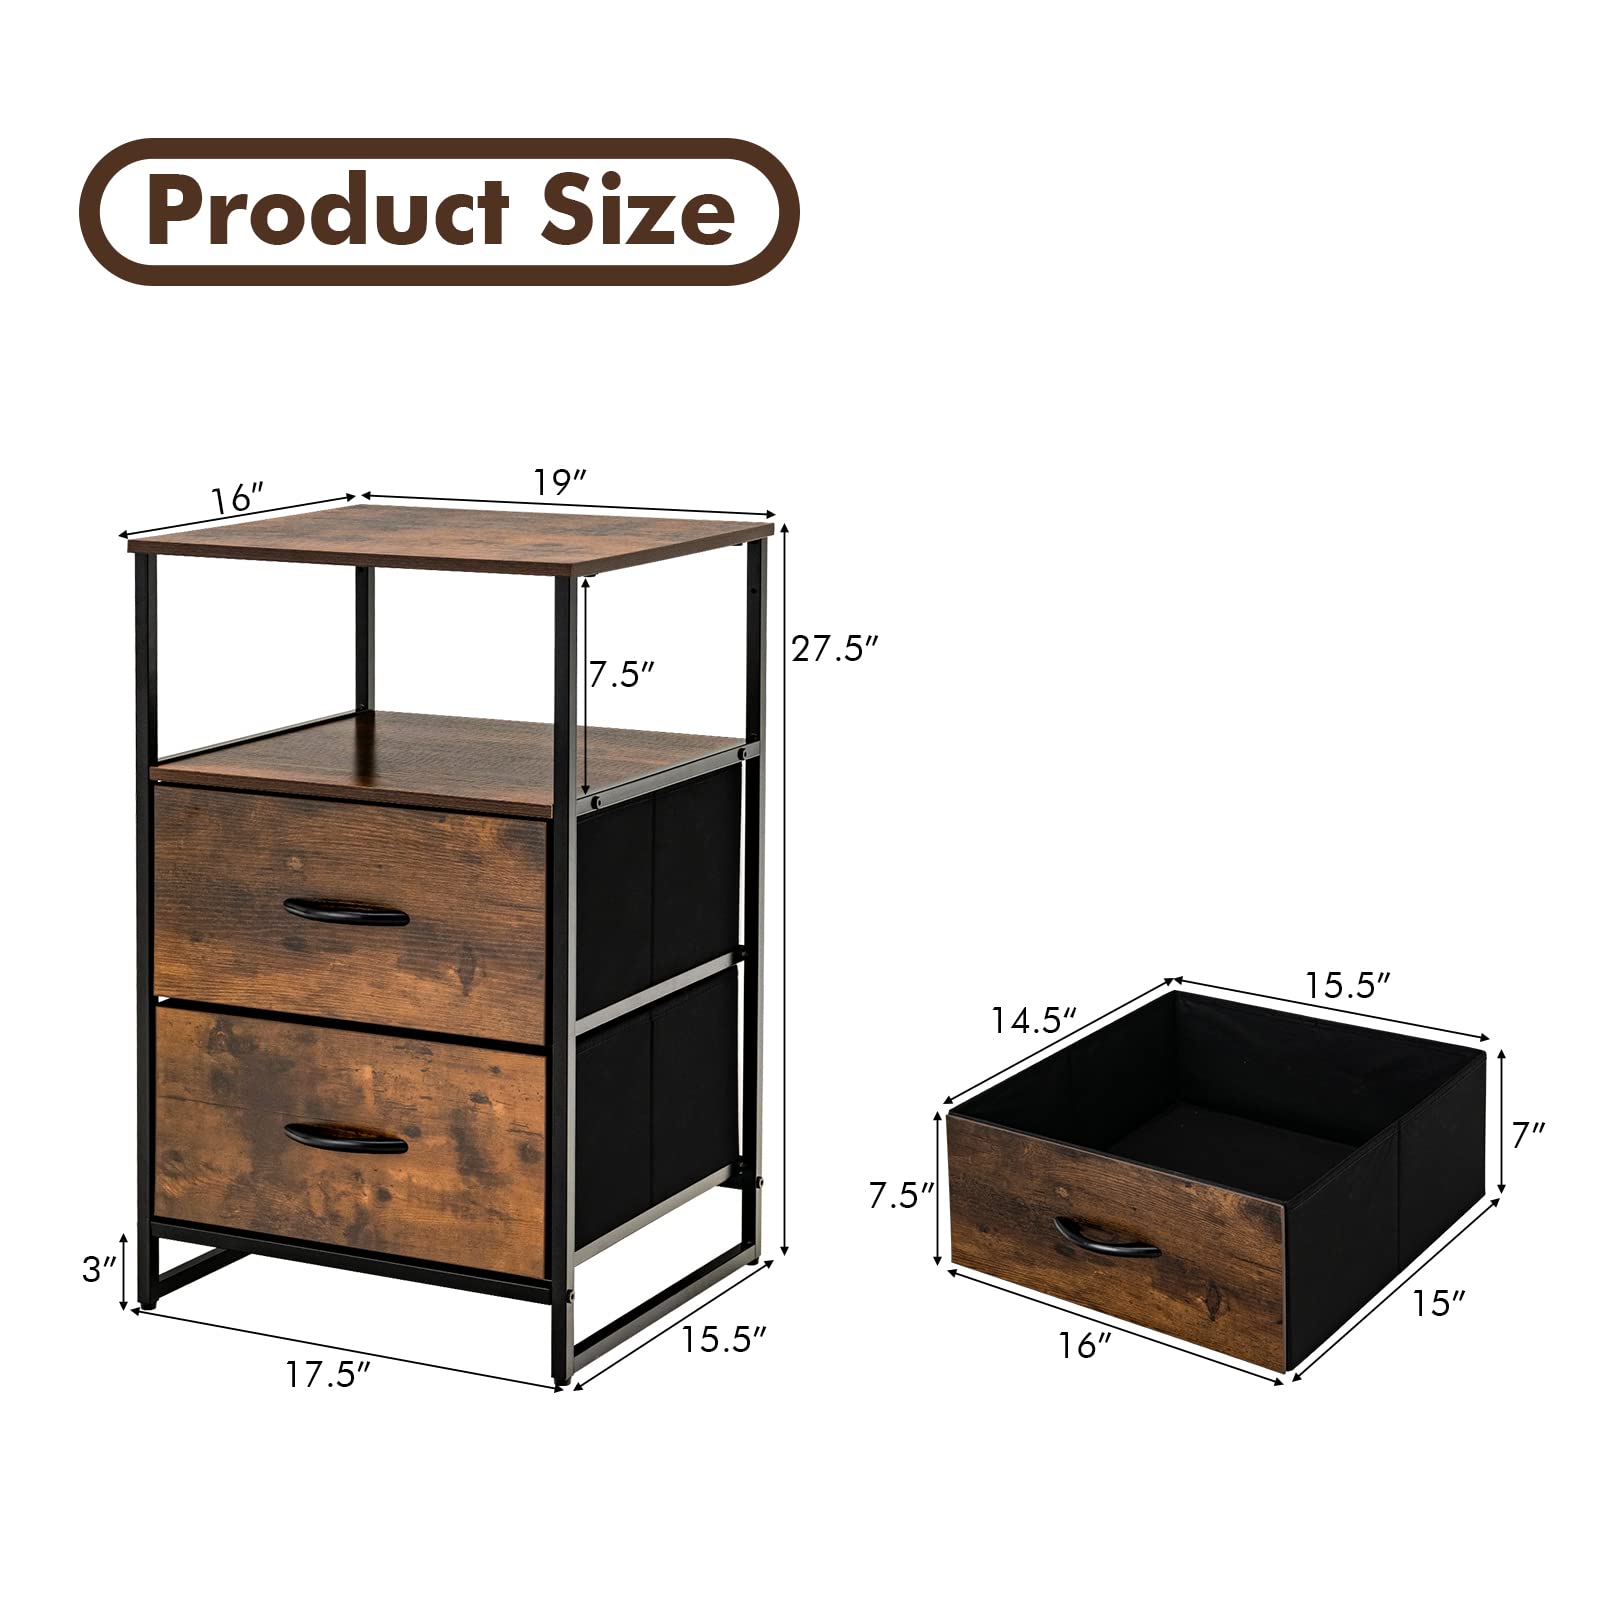 Giantex 2 Drawer Dresser for Bedroom, Tall Nightstand Storage Tower w/Folding and Removable Fabric Drawers, Brown